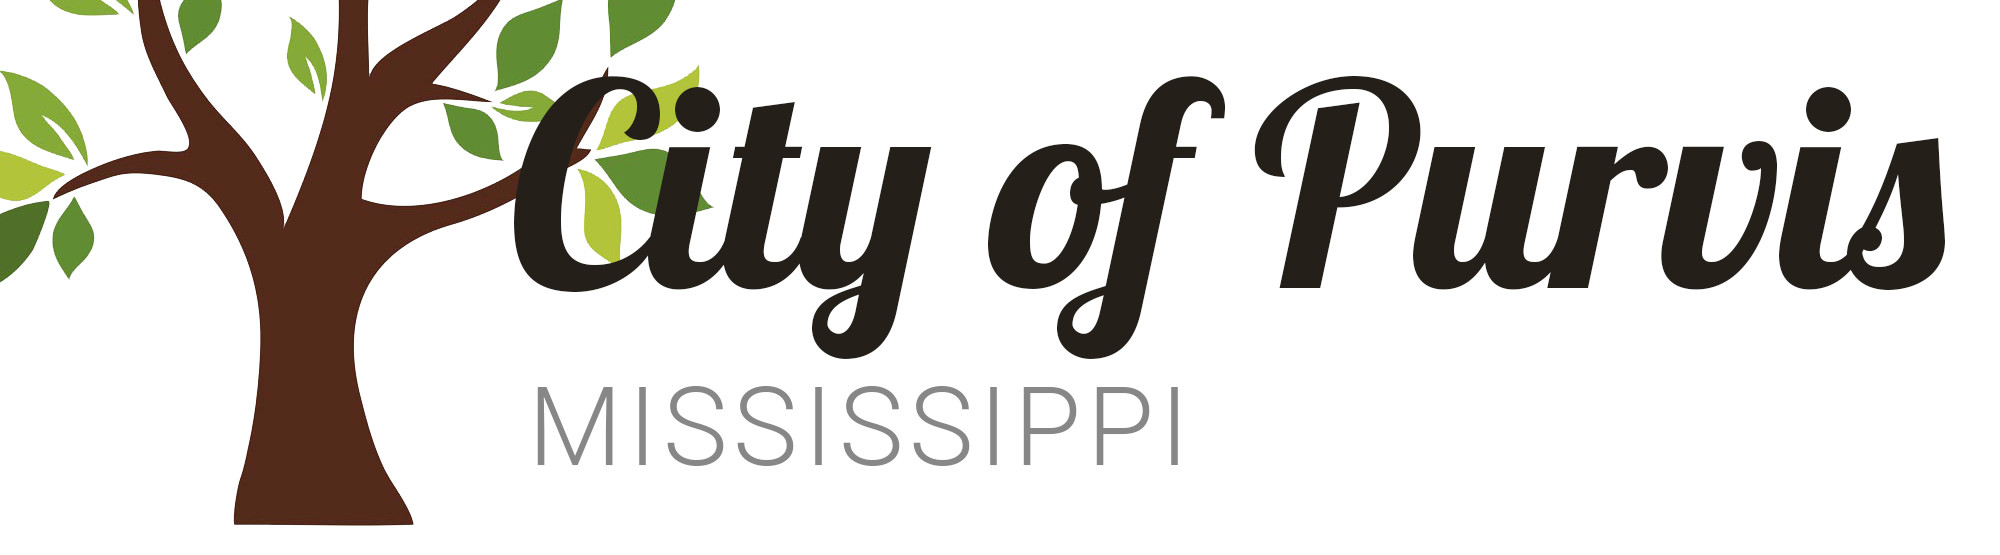 City of Purvis, Mississippi